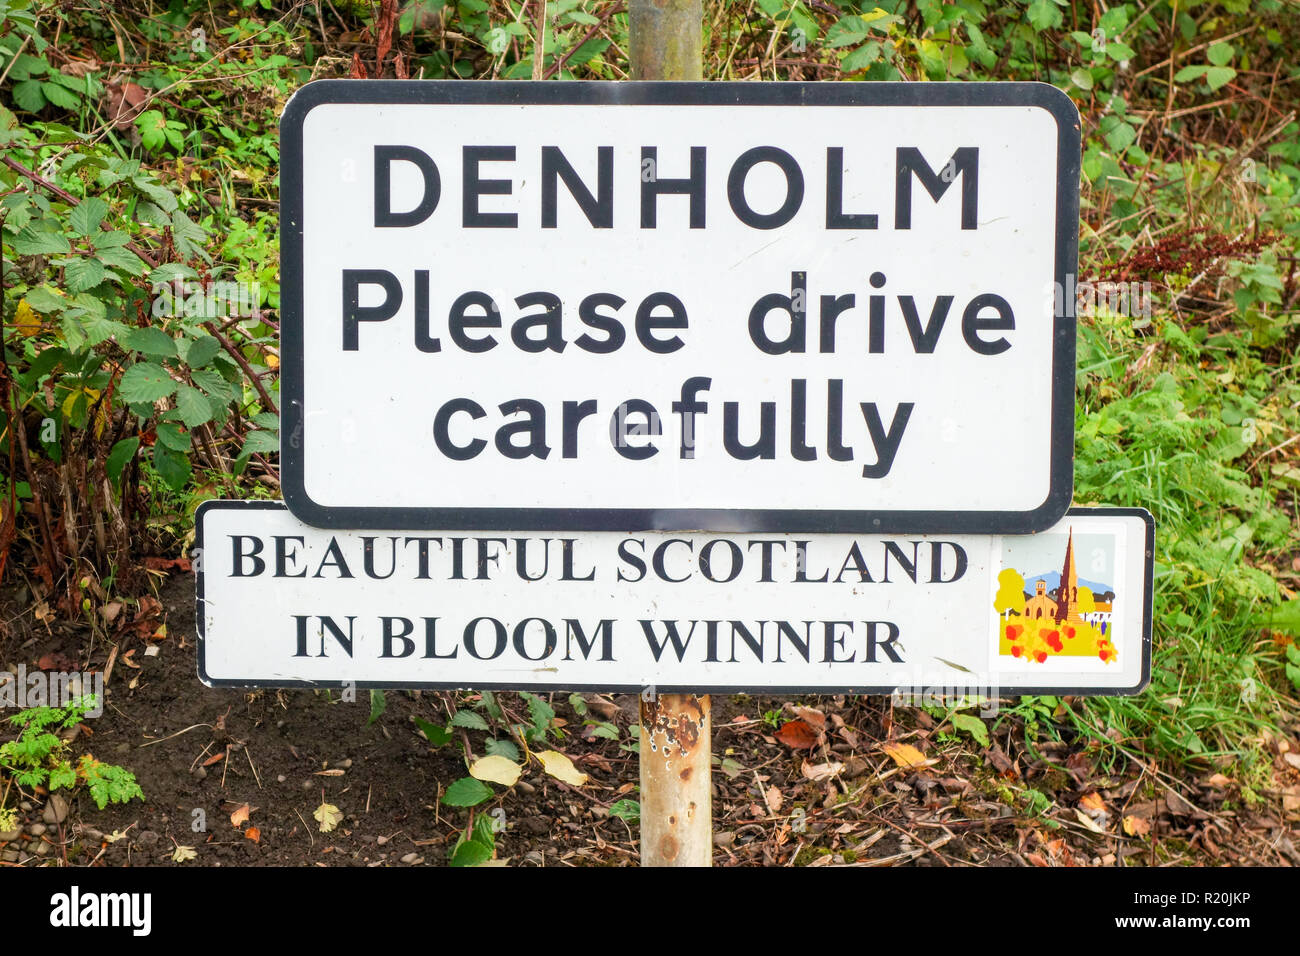 Denholm - Please Drive Carefully road sign Stock Photo